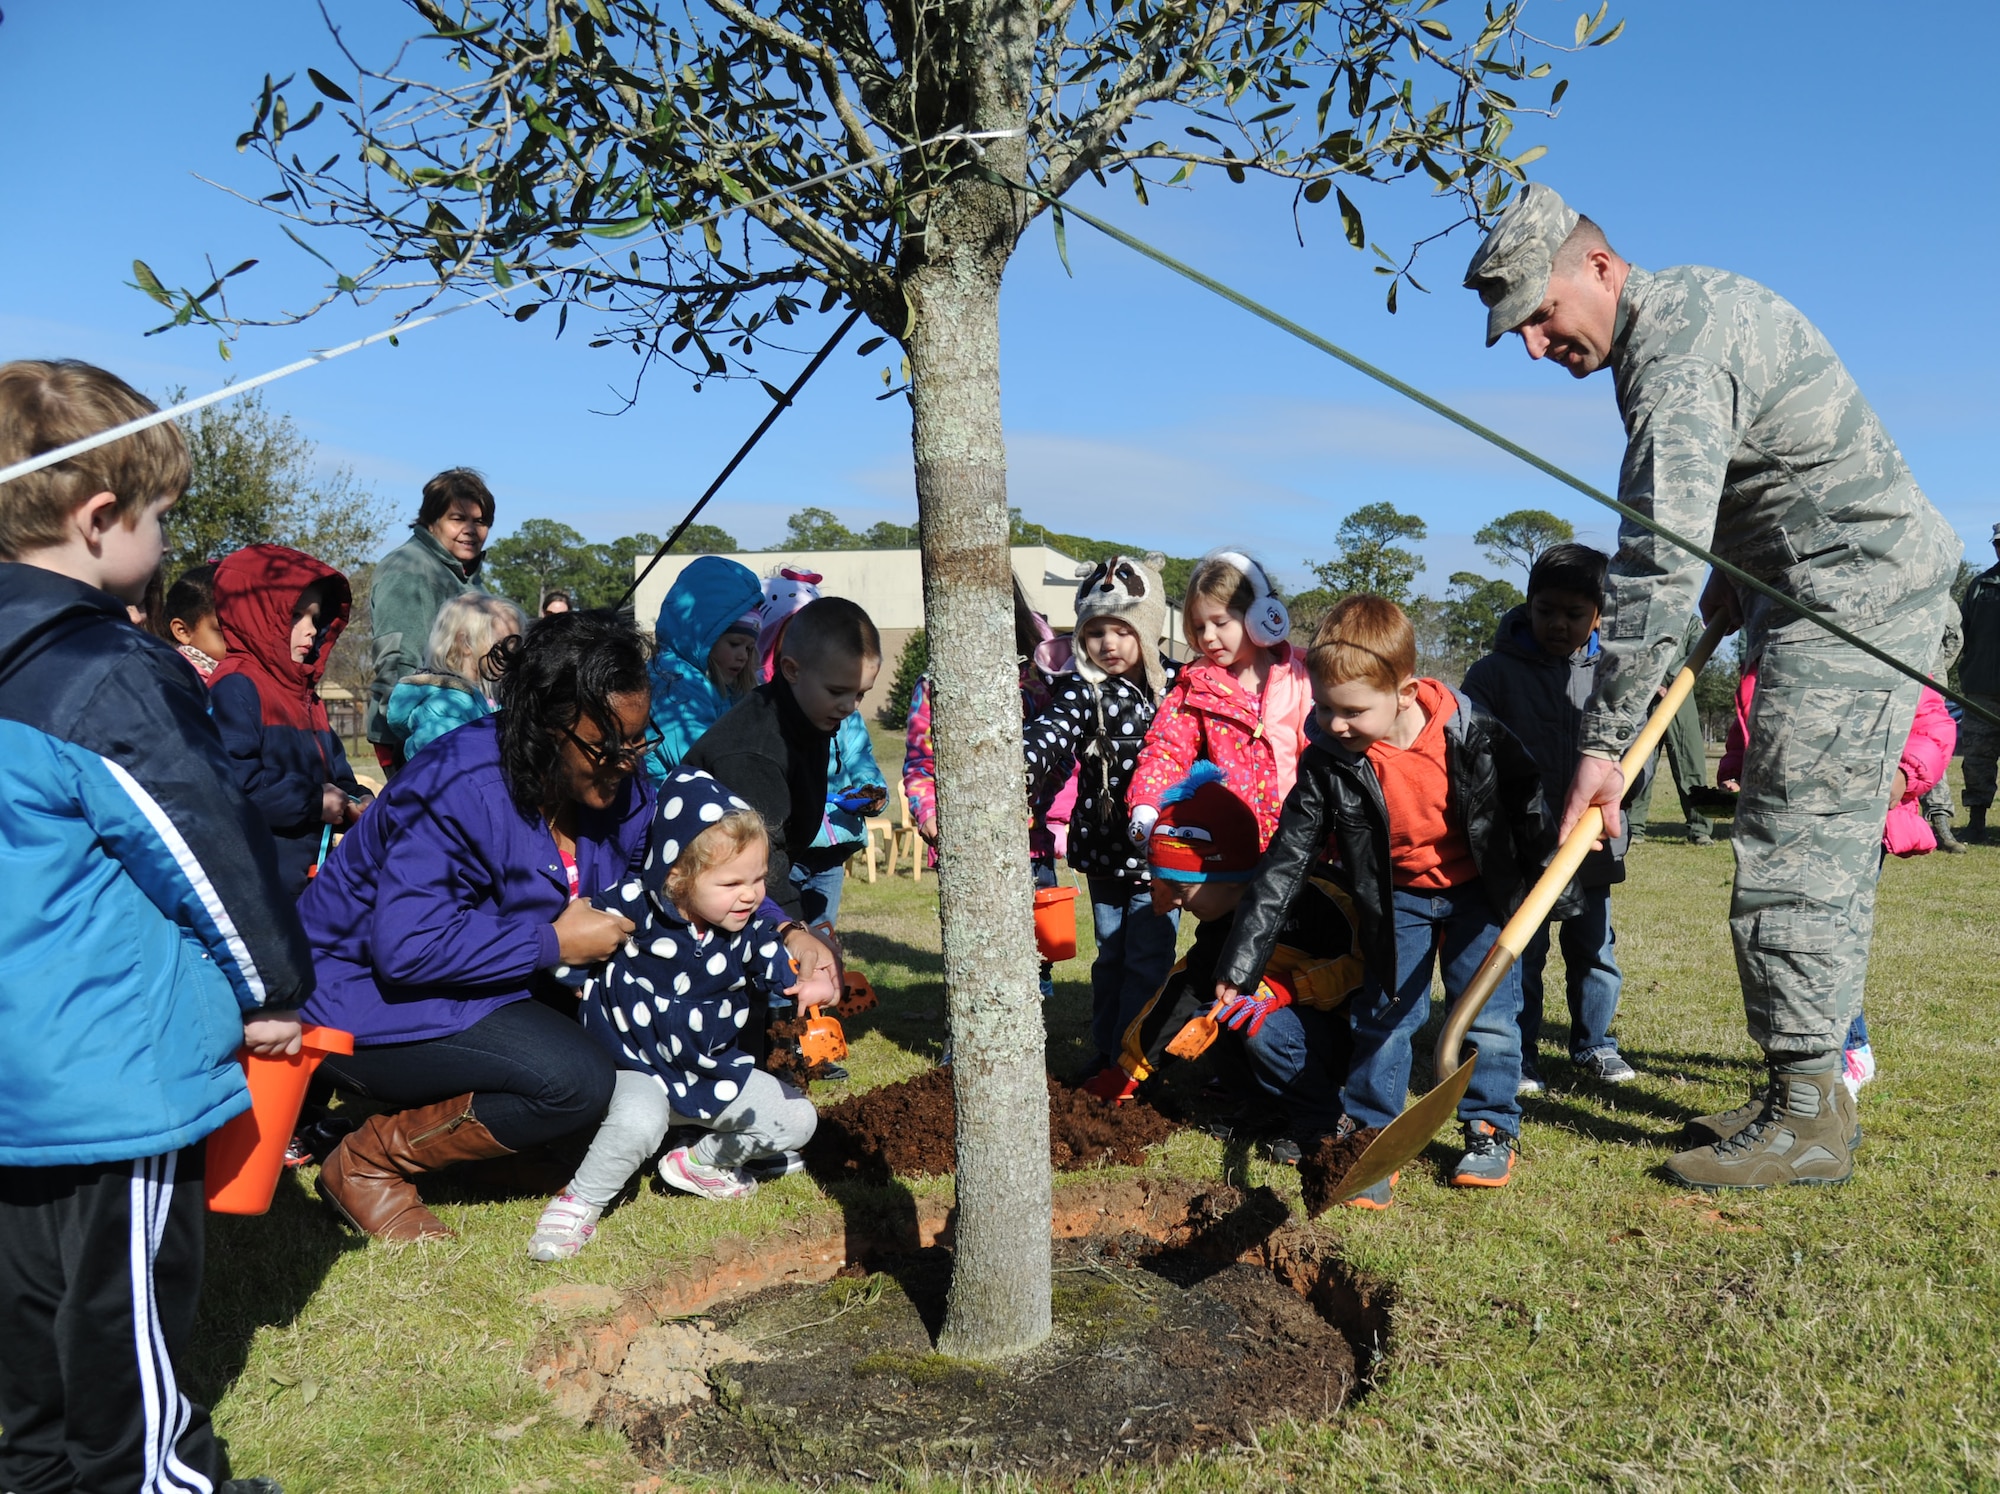 Brig. Gen. Patrick Higby, the 81st Training Wing commander, receives help from children from the child development center with planting a live oak tree outside of the CDC during an Arbor Day celebration Feb. 19, 2015, at Keesler Air Force Base, Miss. Higby, who grew up in Germany, appreciates the education and opportunities he had as a military child. (U.S. Air Force photo/Kemberly Groue)